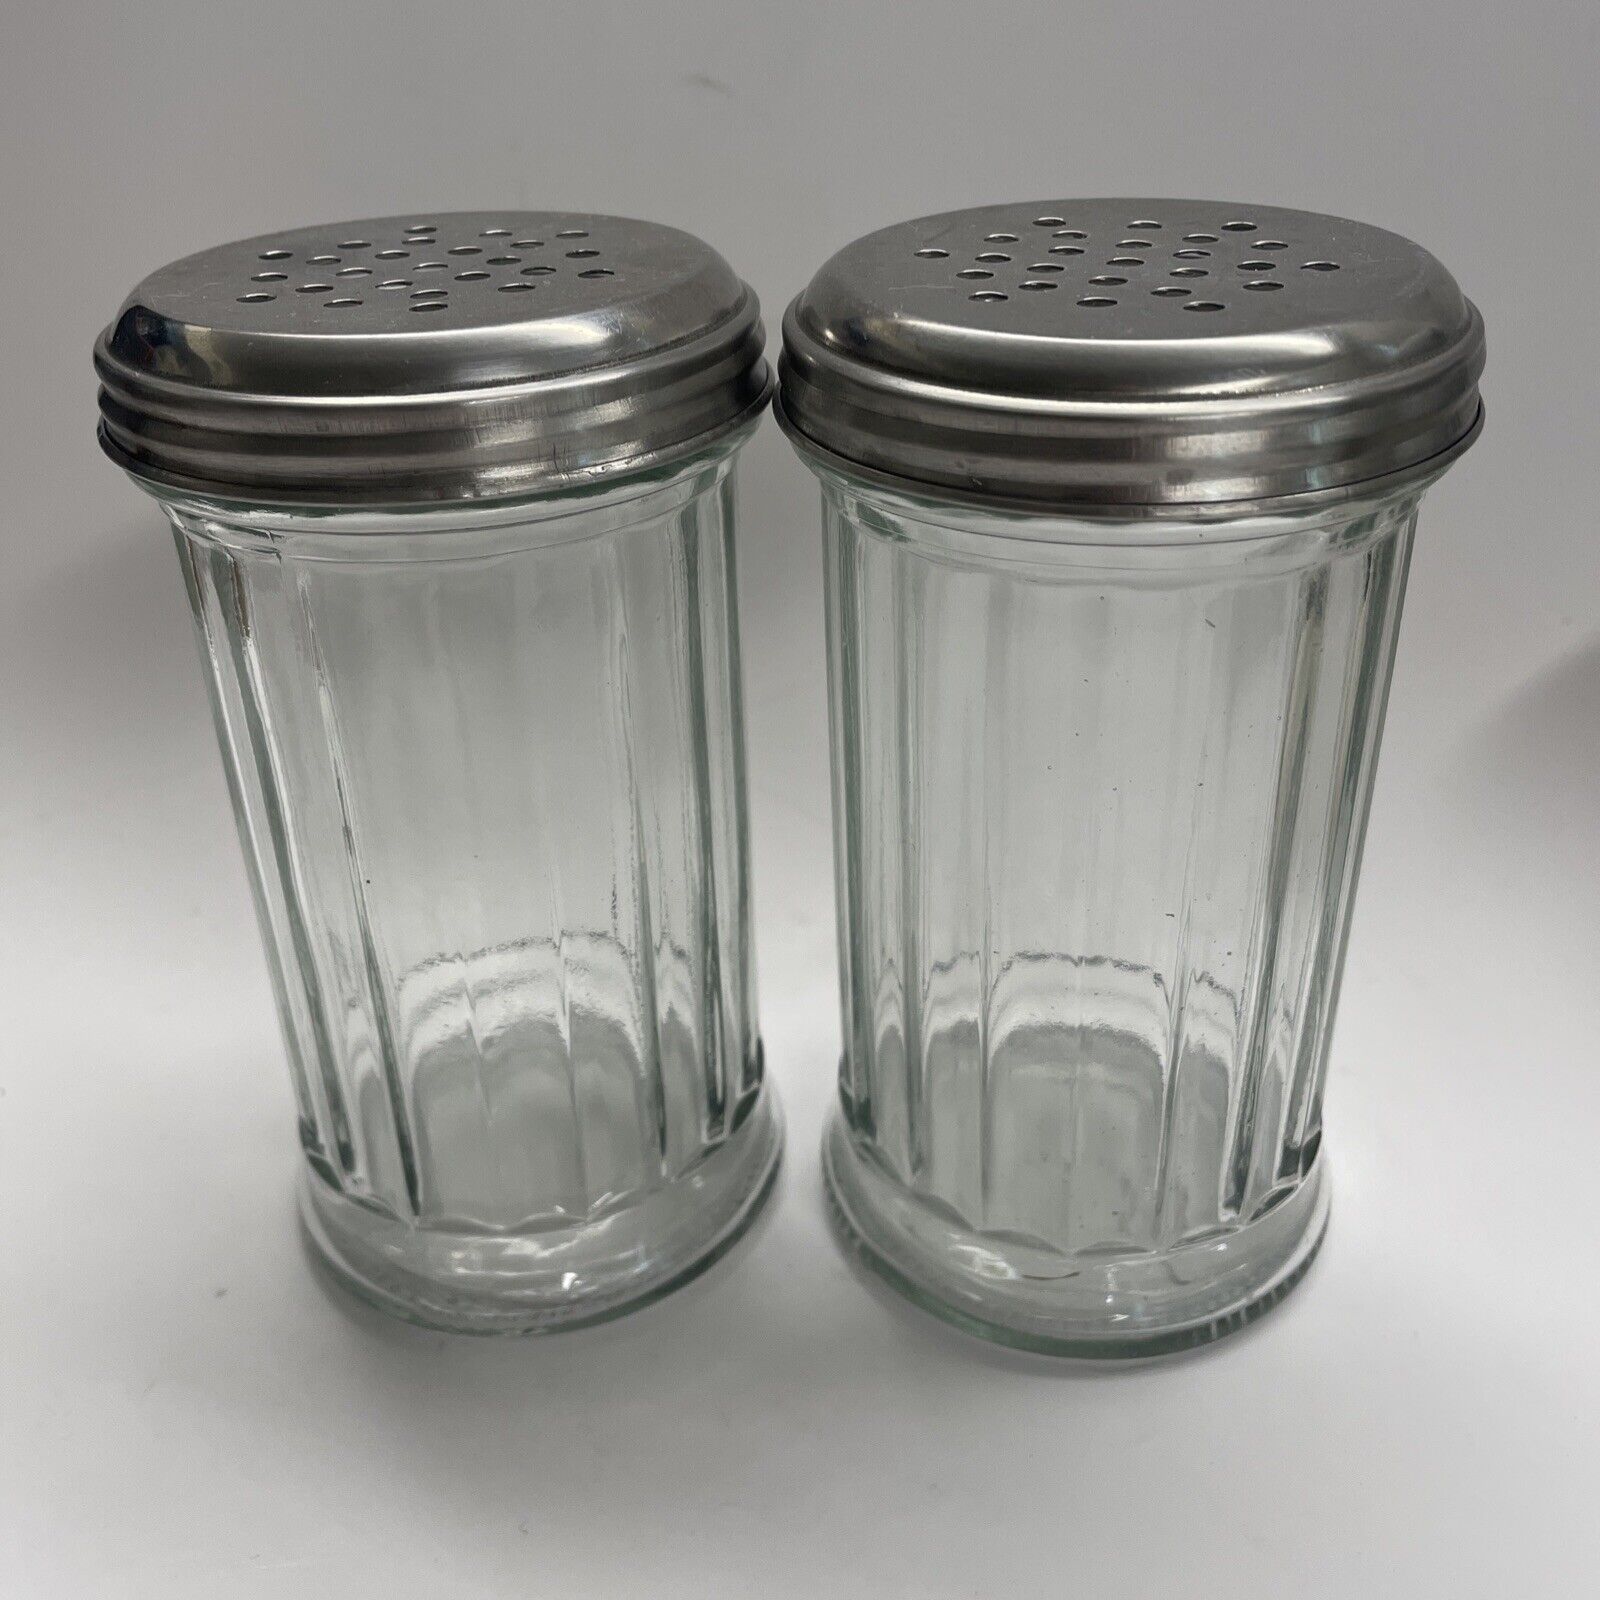 Lot of2 Vtg Restaurant Style Herb Parmesan Cheese Shaker Jar & Ribbed Glass